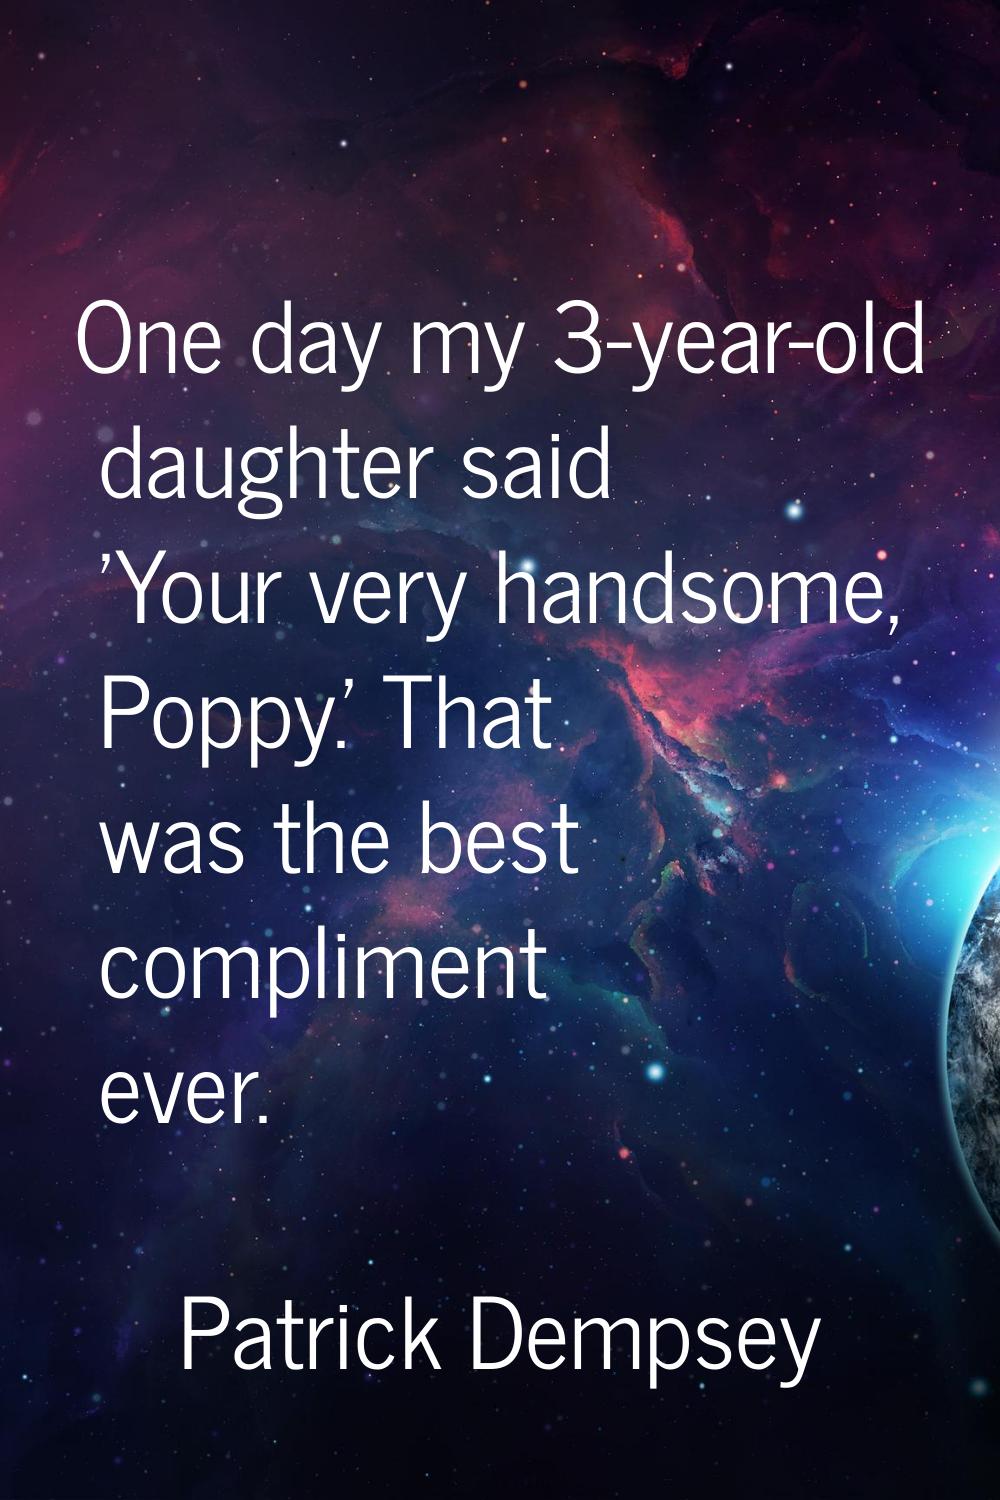 One day my 3-year-old daughter said 'Your very handsome, Poppy.' That was the best compliment ever.